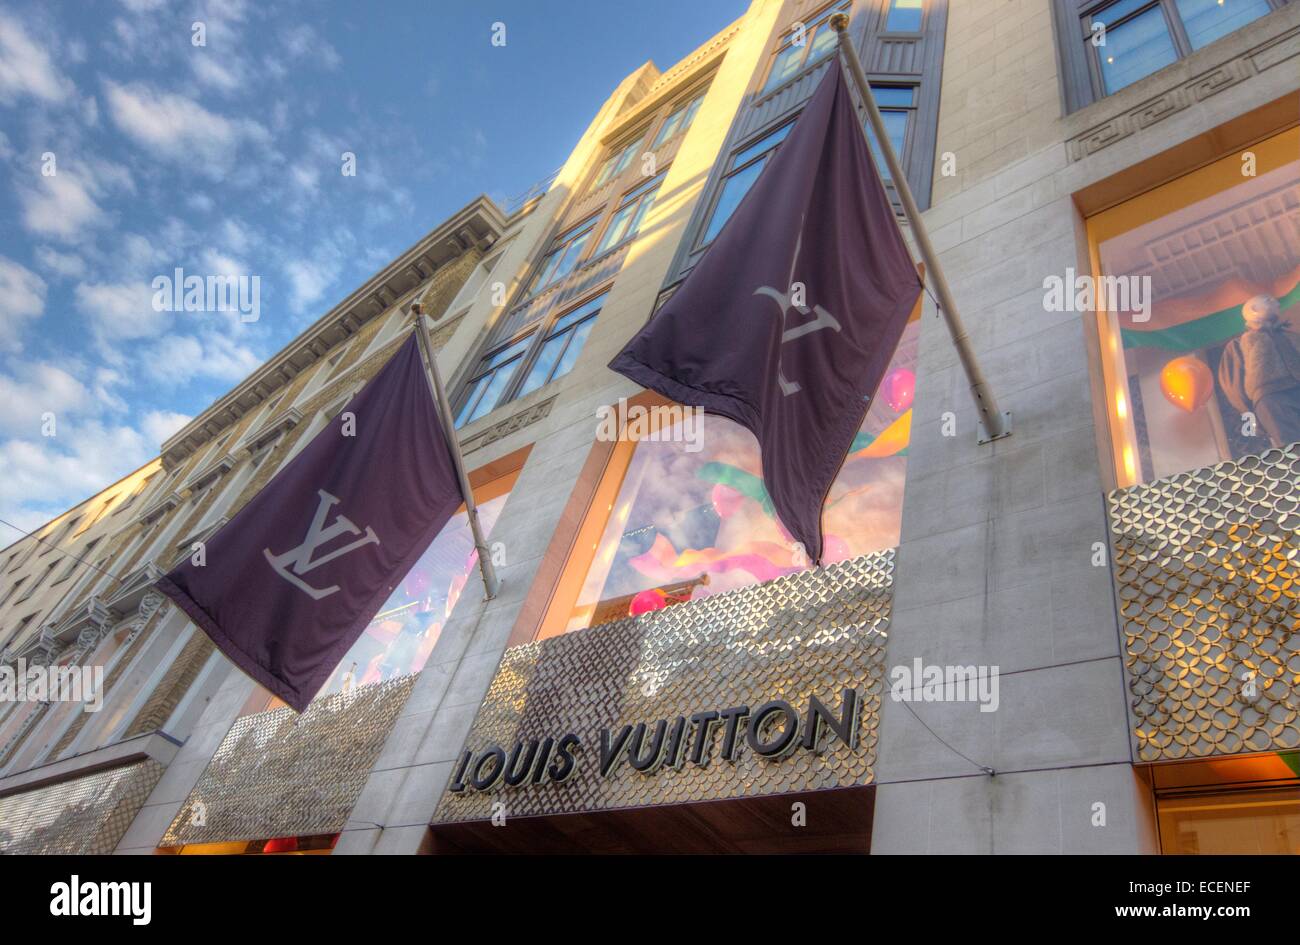 Louis Vuitton Shop in London Editorial Photo - Image of today